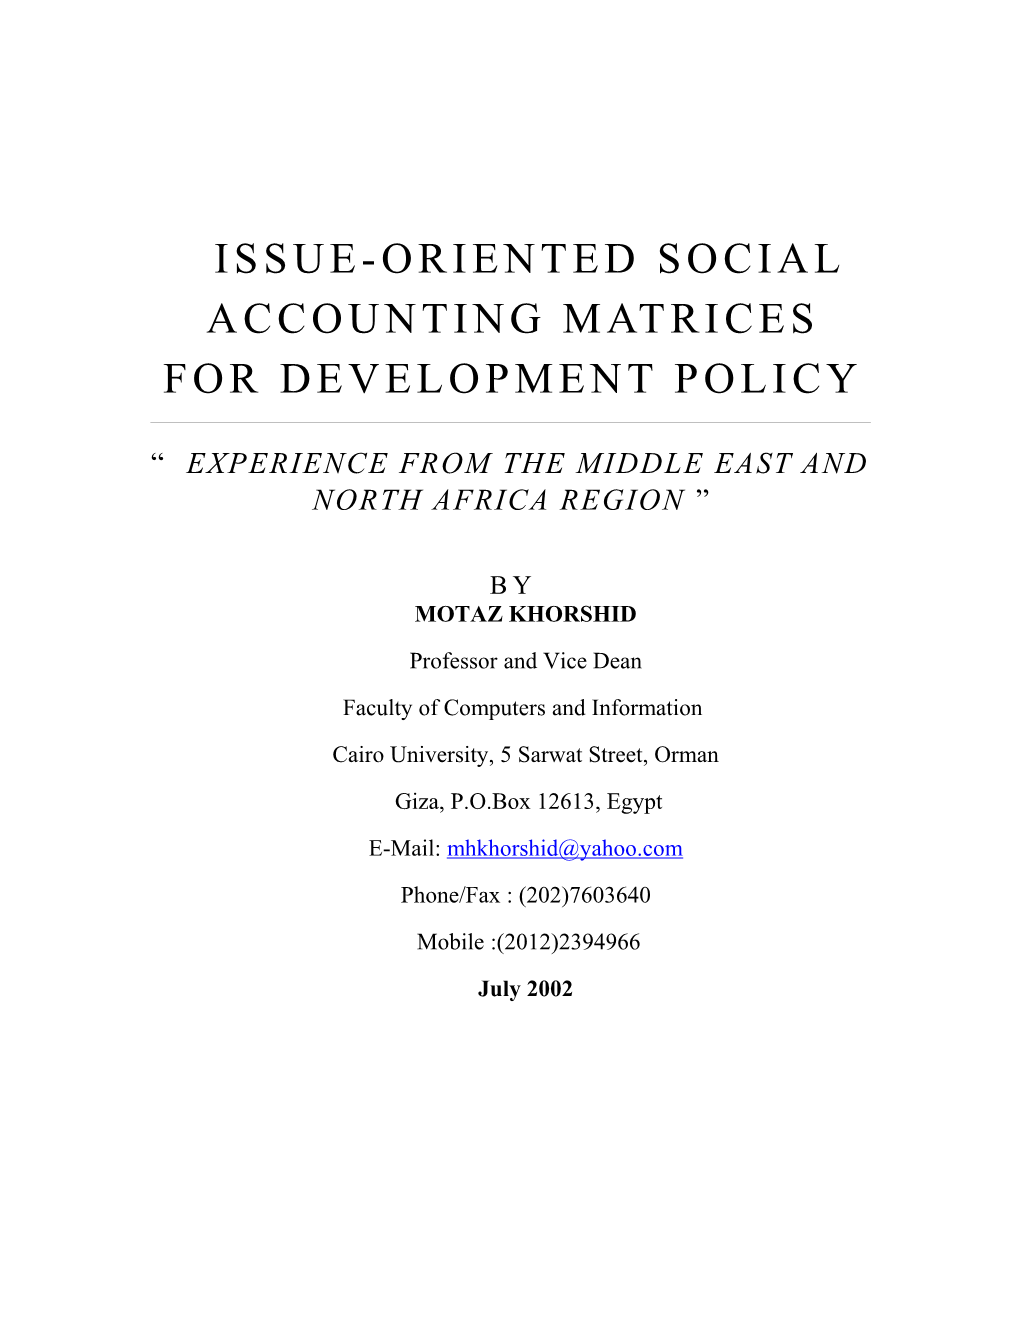 Issue-Oriented Social Accounting Matrices for Development Policy